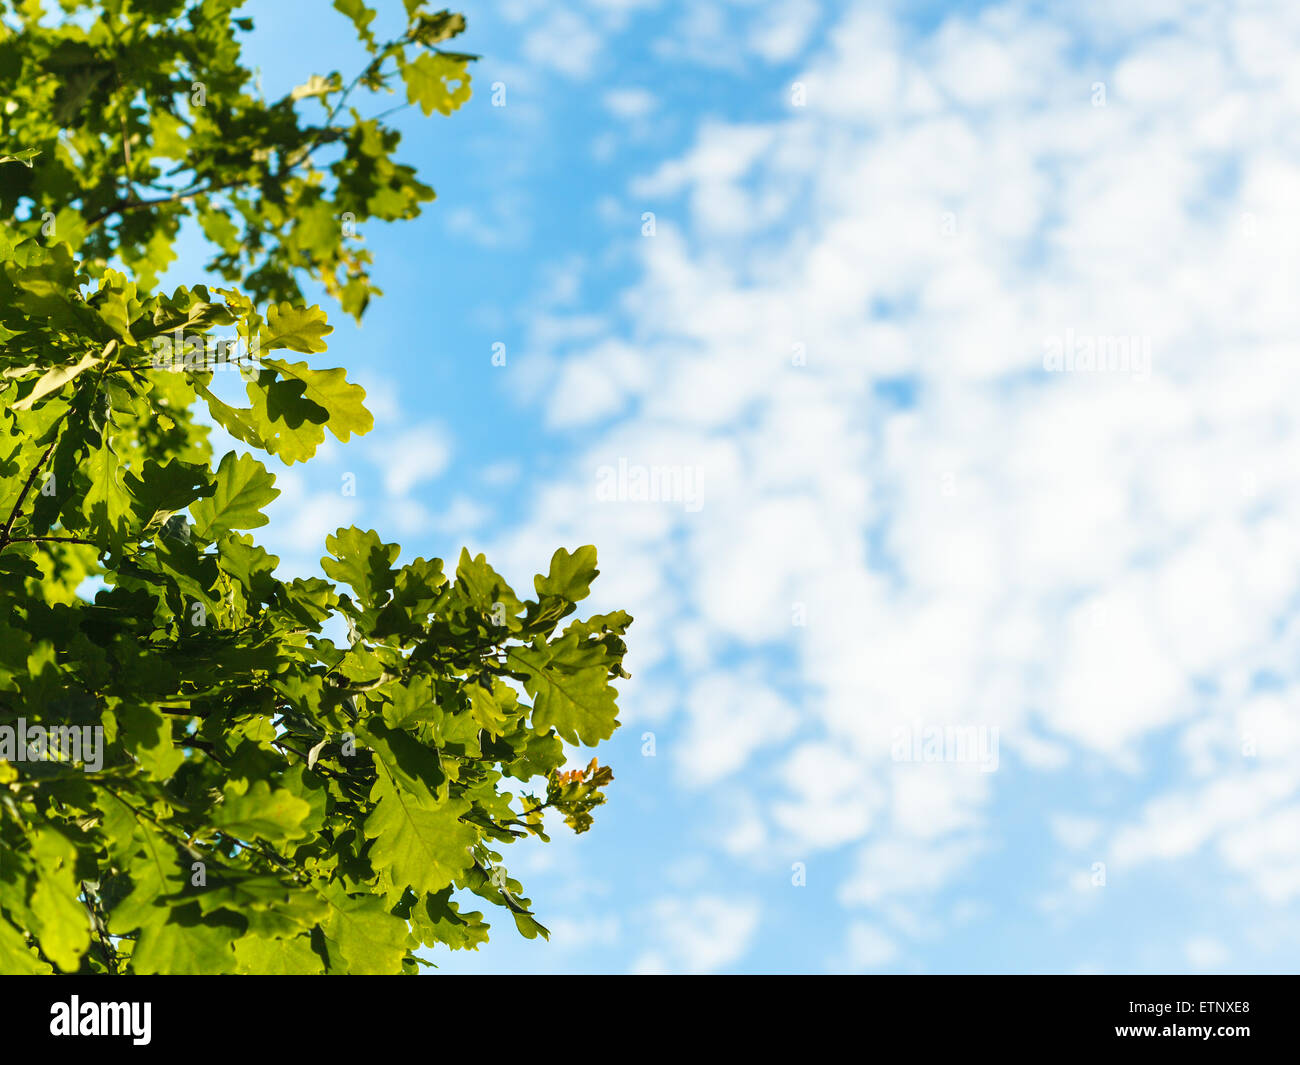 natural summer background with sunlit green oak leaves and blue sky with white clouds Stock Photo